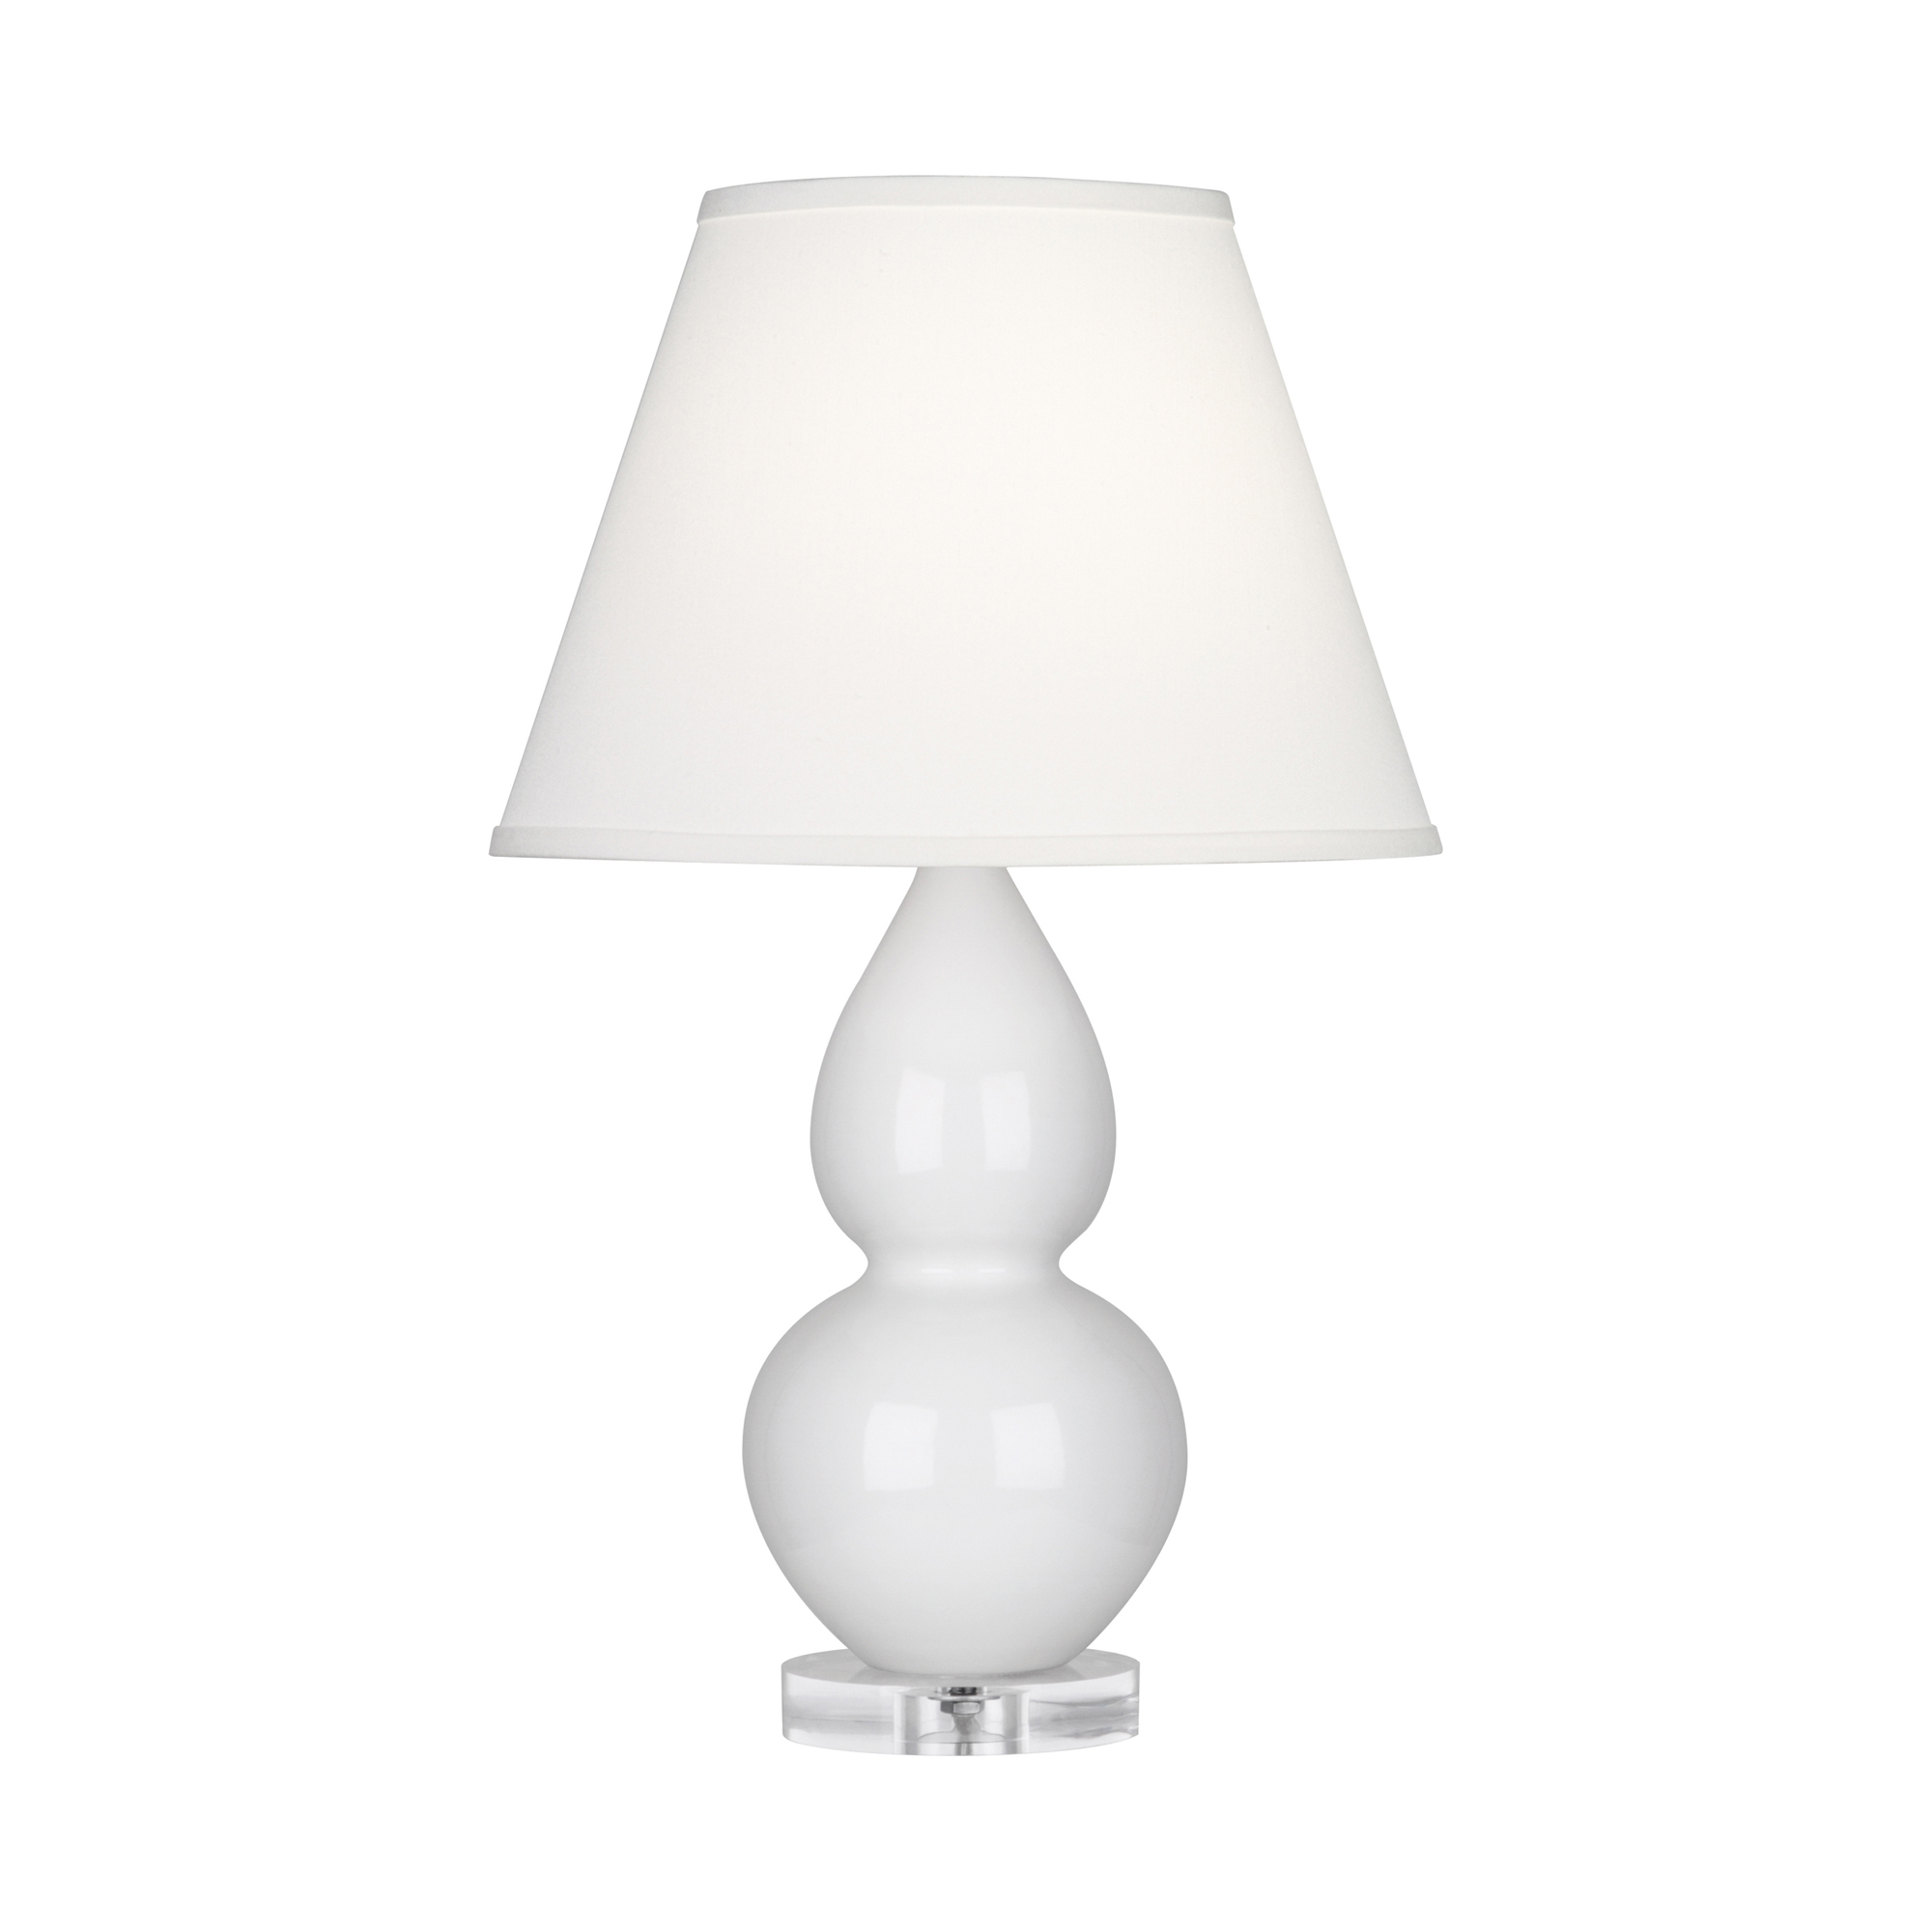 Small Double Gourd Accent Lamp Style #A690X